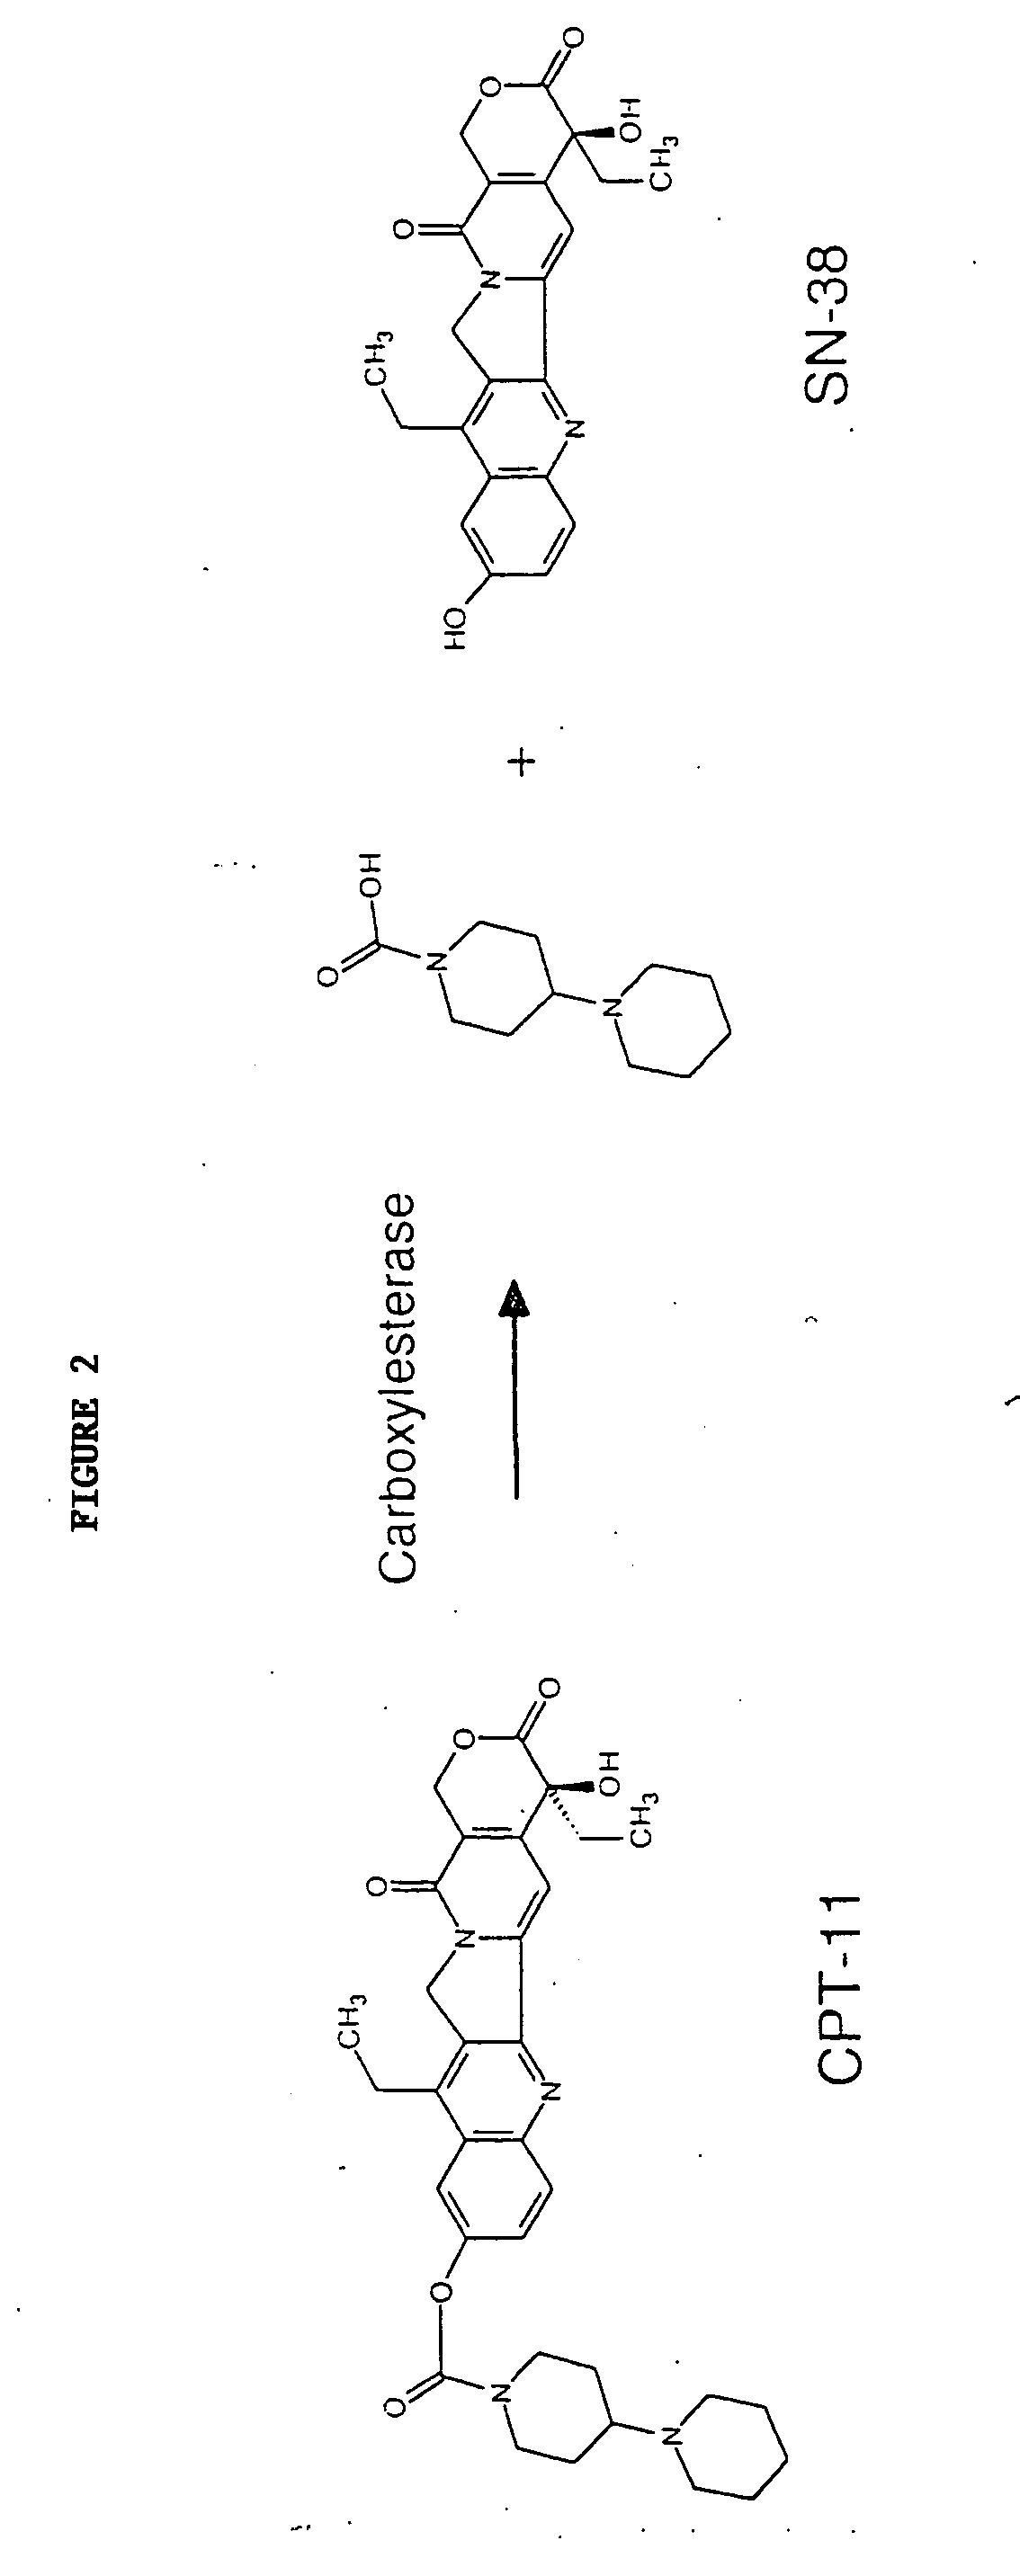 Butyrylcholinesterase variants that alter the activity of chemotherapeutic agents